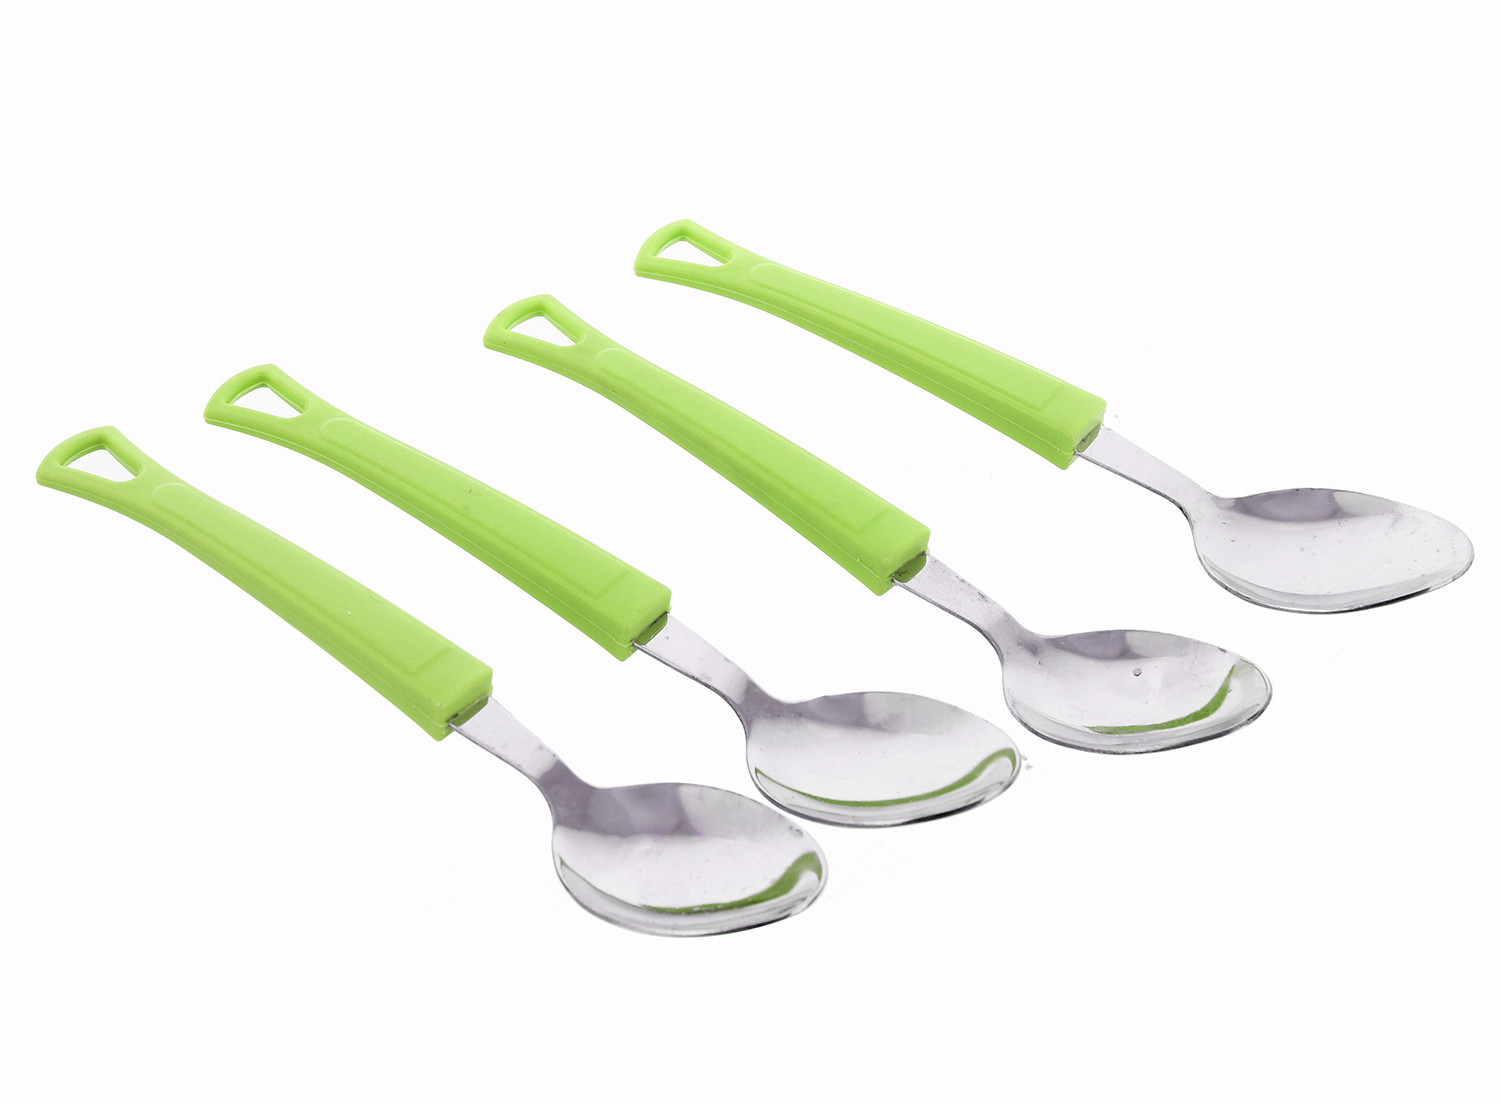 Kuber Industries Swastic Cutlery Set 24 pcs with Stand Made from Stainless Steel and ABS Plastic (Green) -CTKTC39444